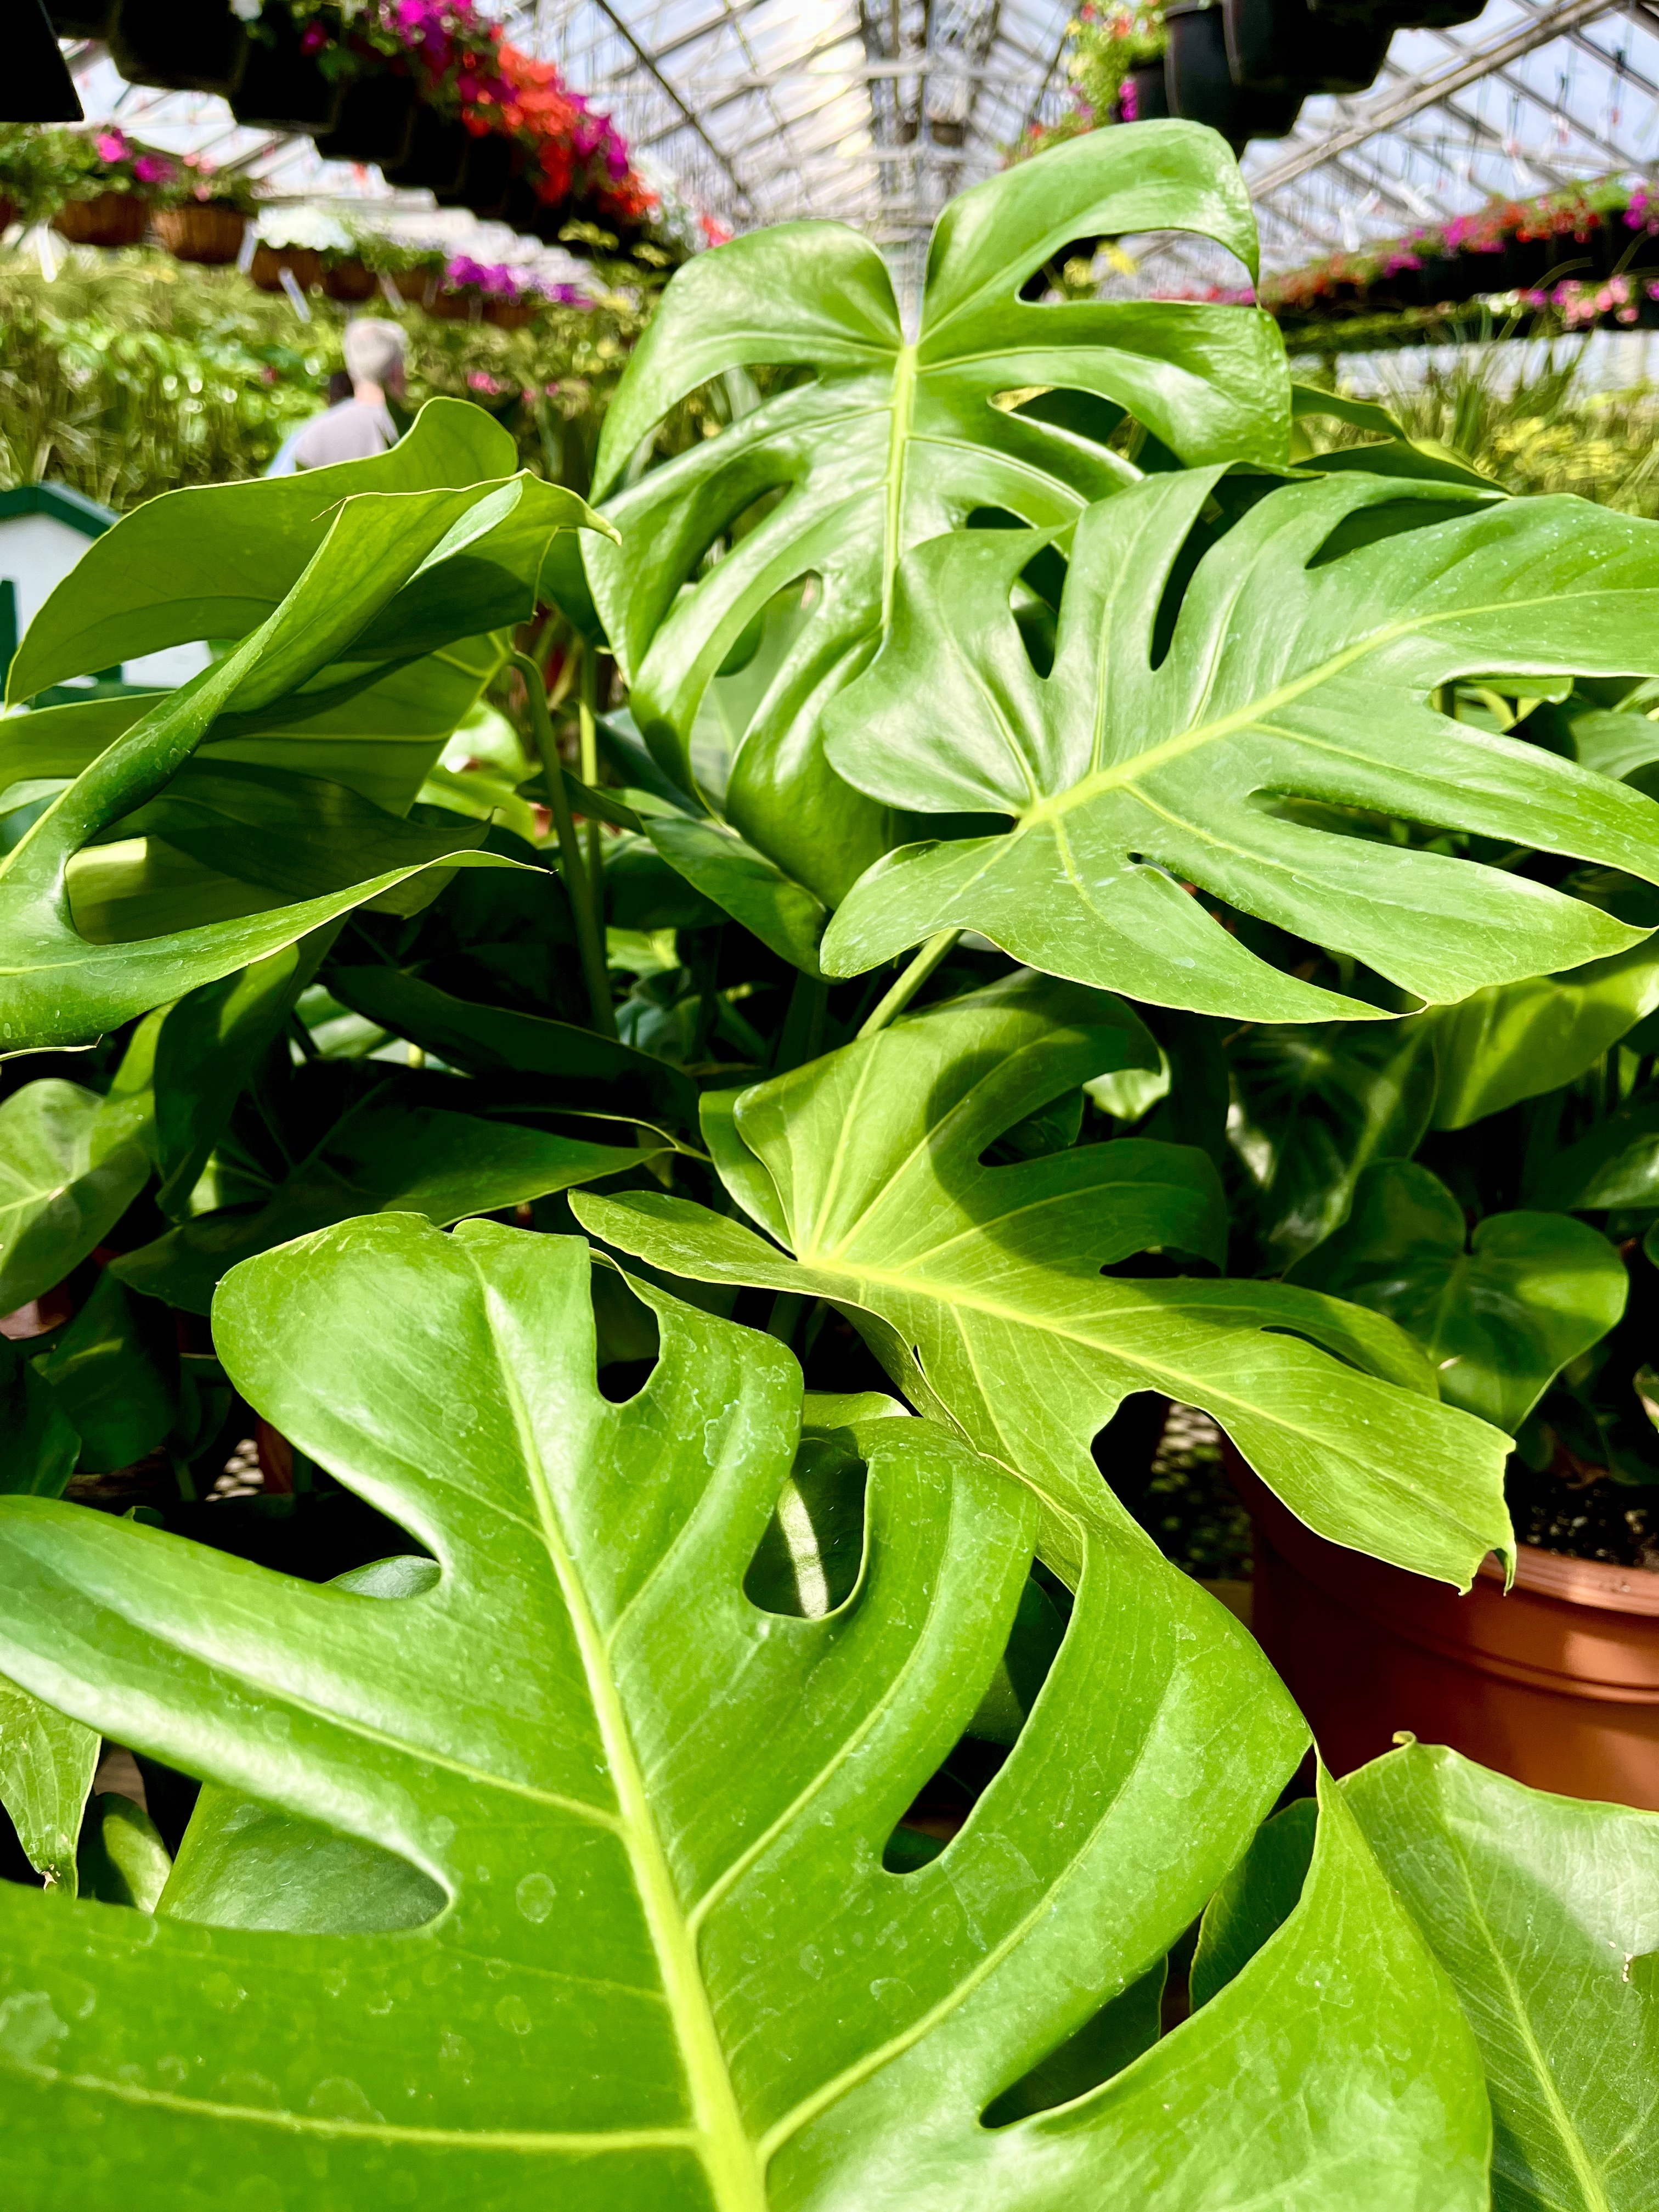 Several bright green monstera leaves in a sunny greenhouse.